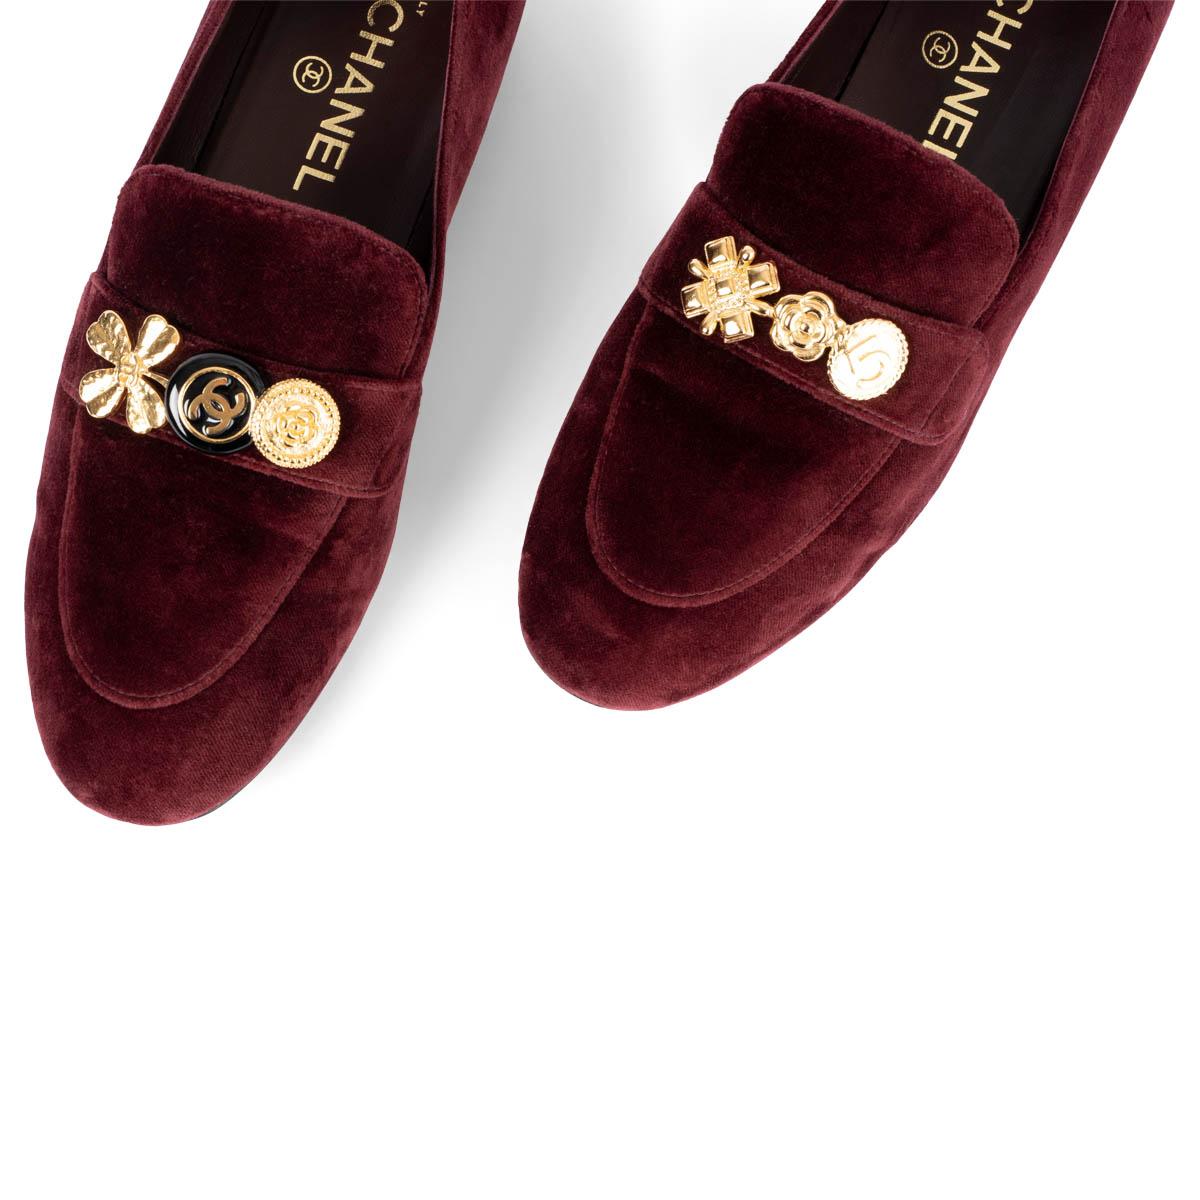 CHANEL burgundy velvet 2019 19B LUCKY CHARM Loafers Shoes 39 fit 38.5 3